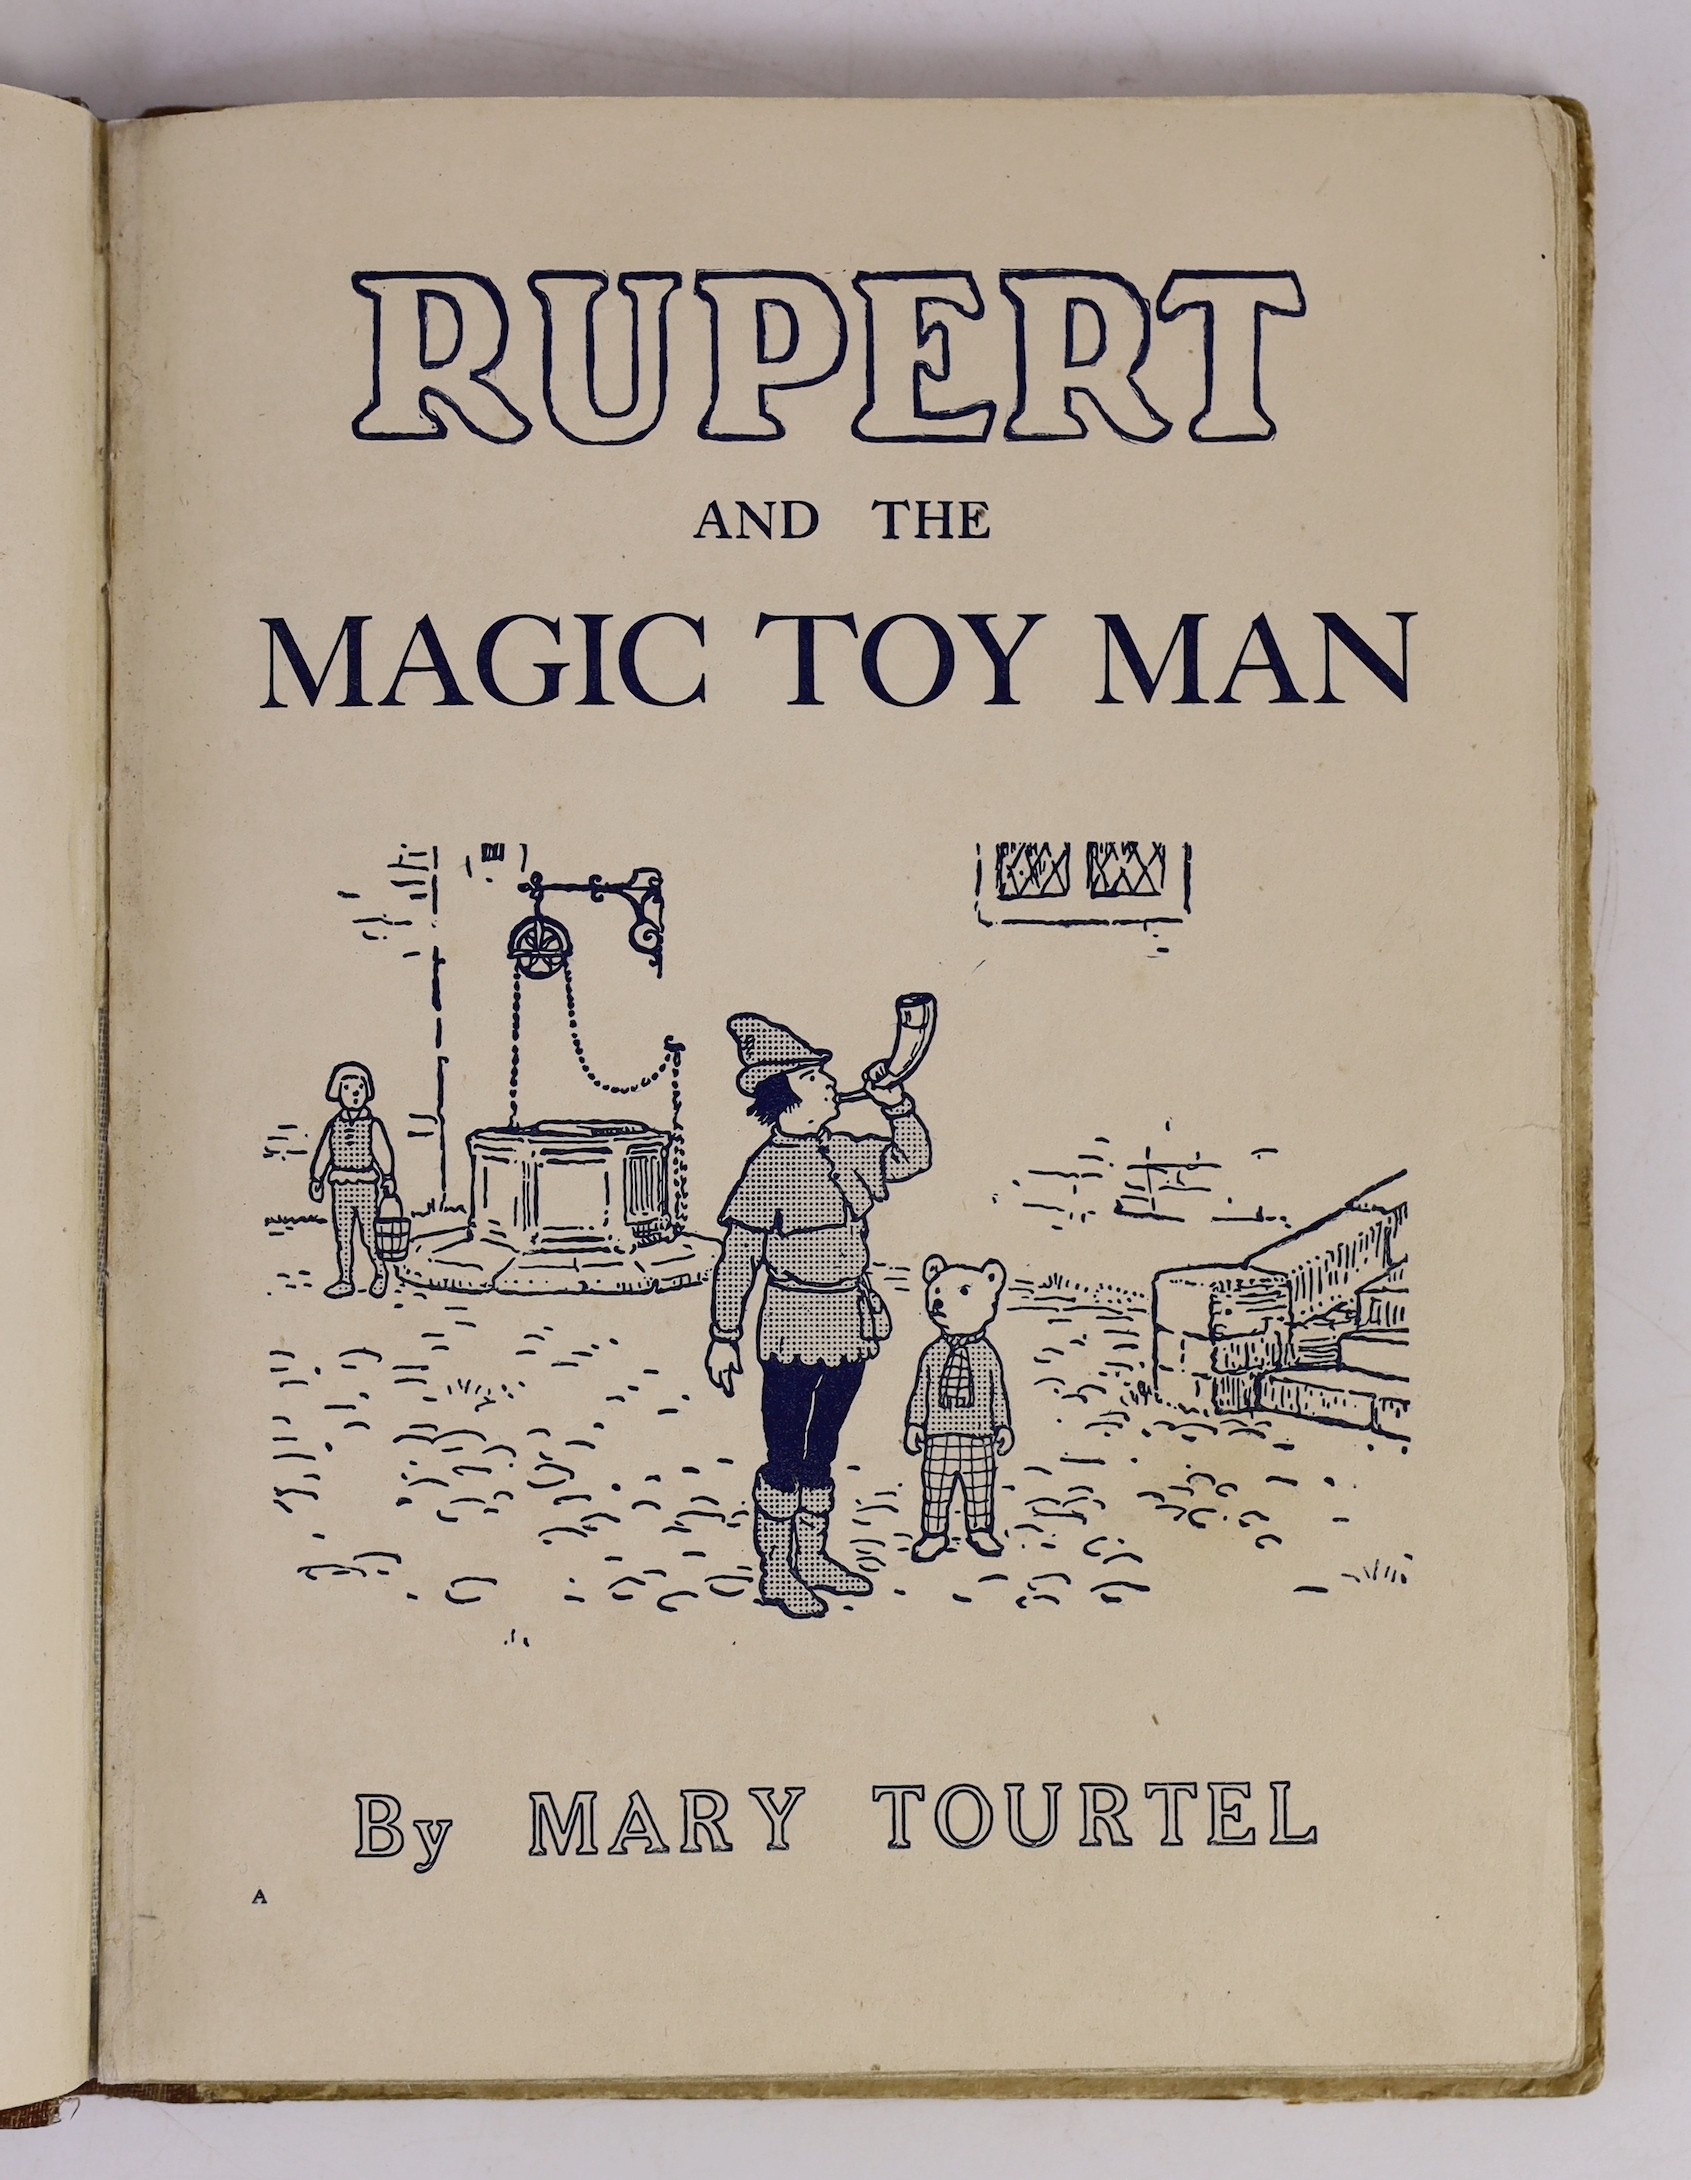 Tourtel, Mary - Rupert and the Magic Toy Man, 4to, pictorial boards, endpapers replaced, Samson Low, Marston & Co., Ltd., London, 1925, Note: The first book of six in the Rupert Little Bear series.